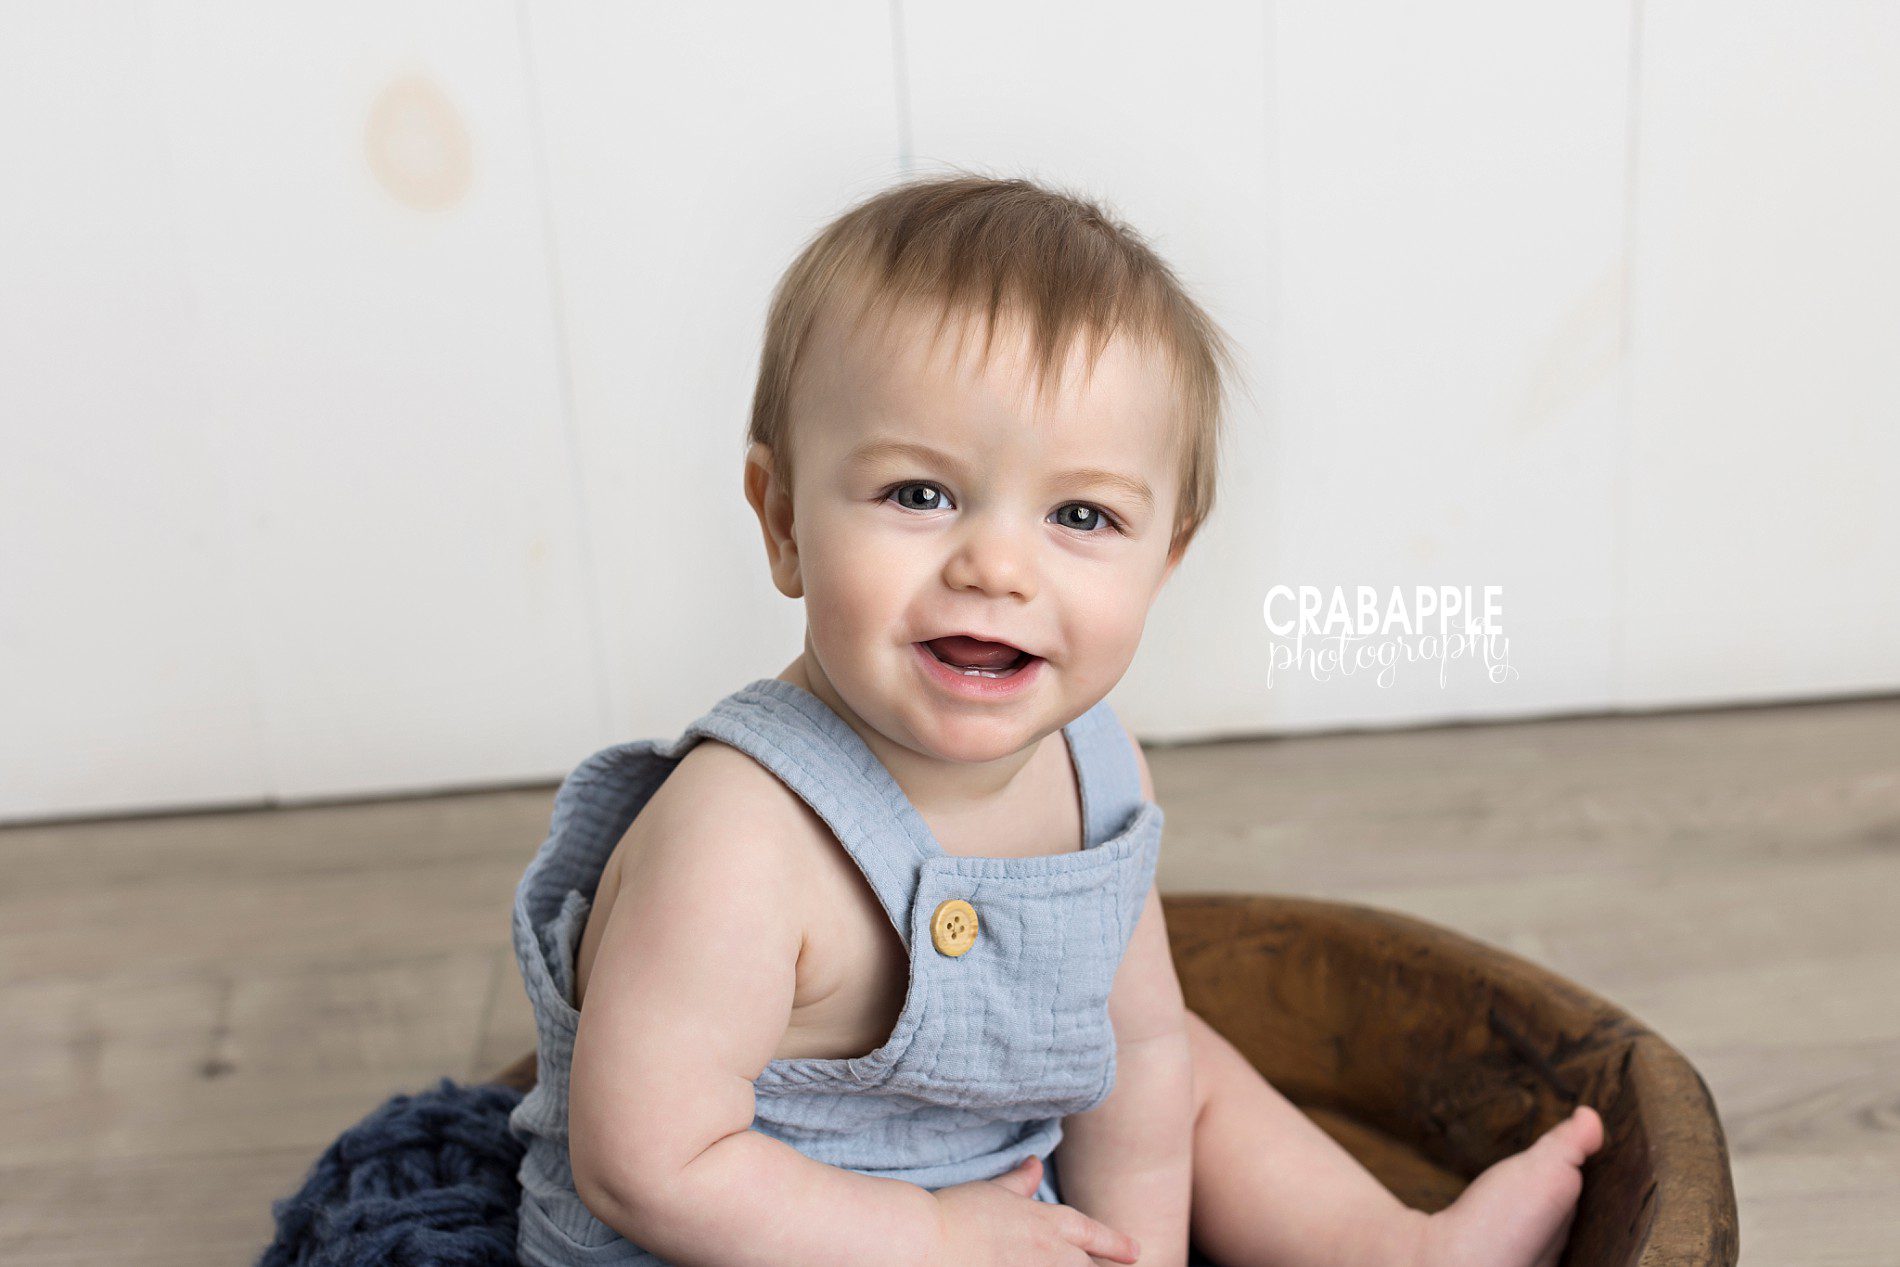 8 month sitter session photo ideas